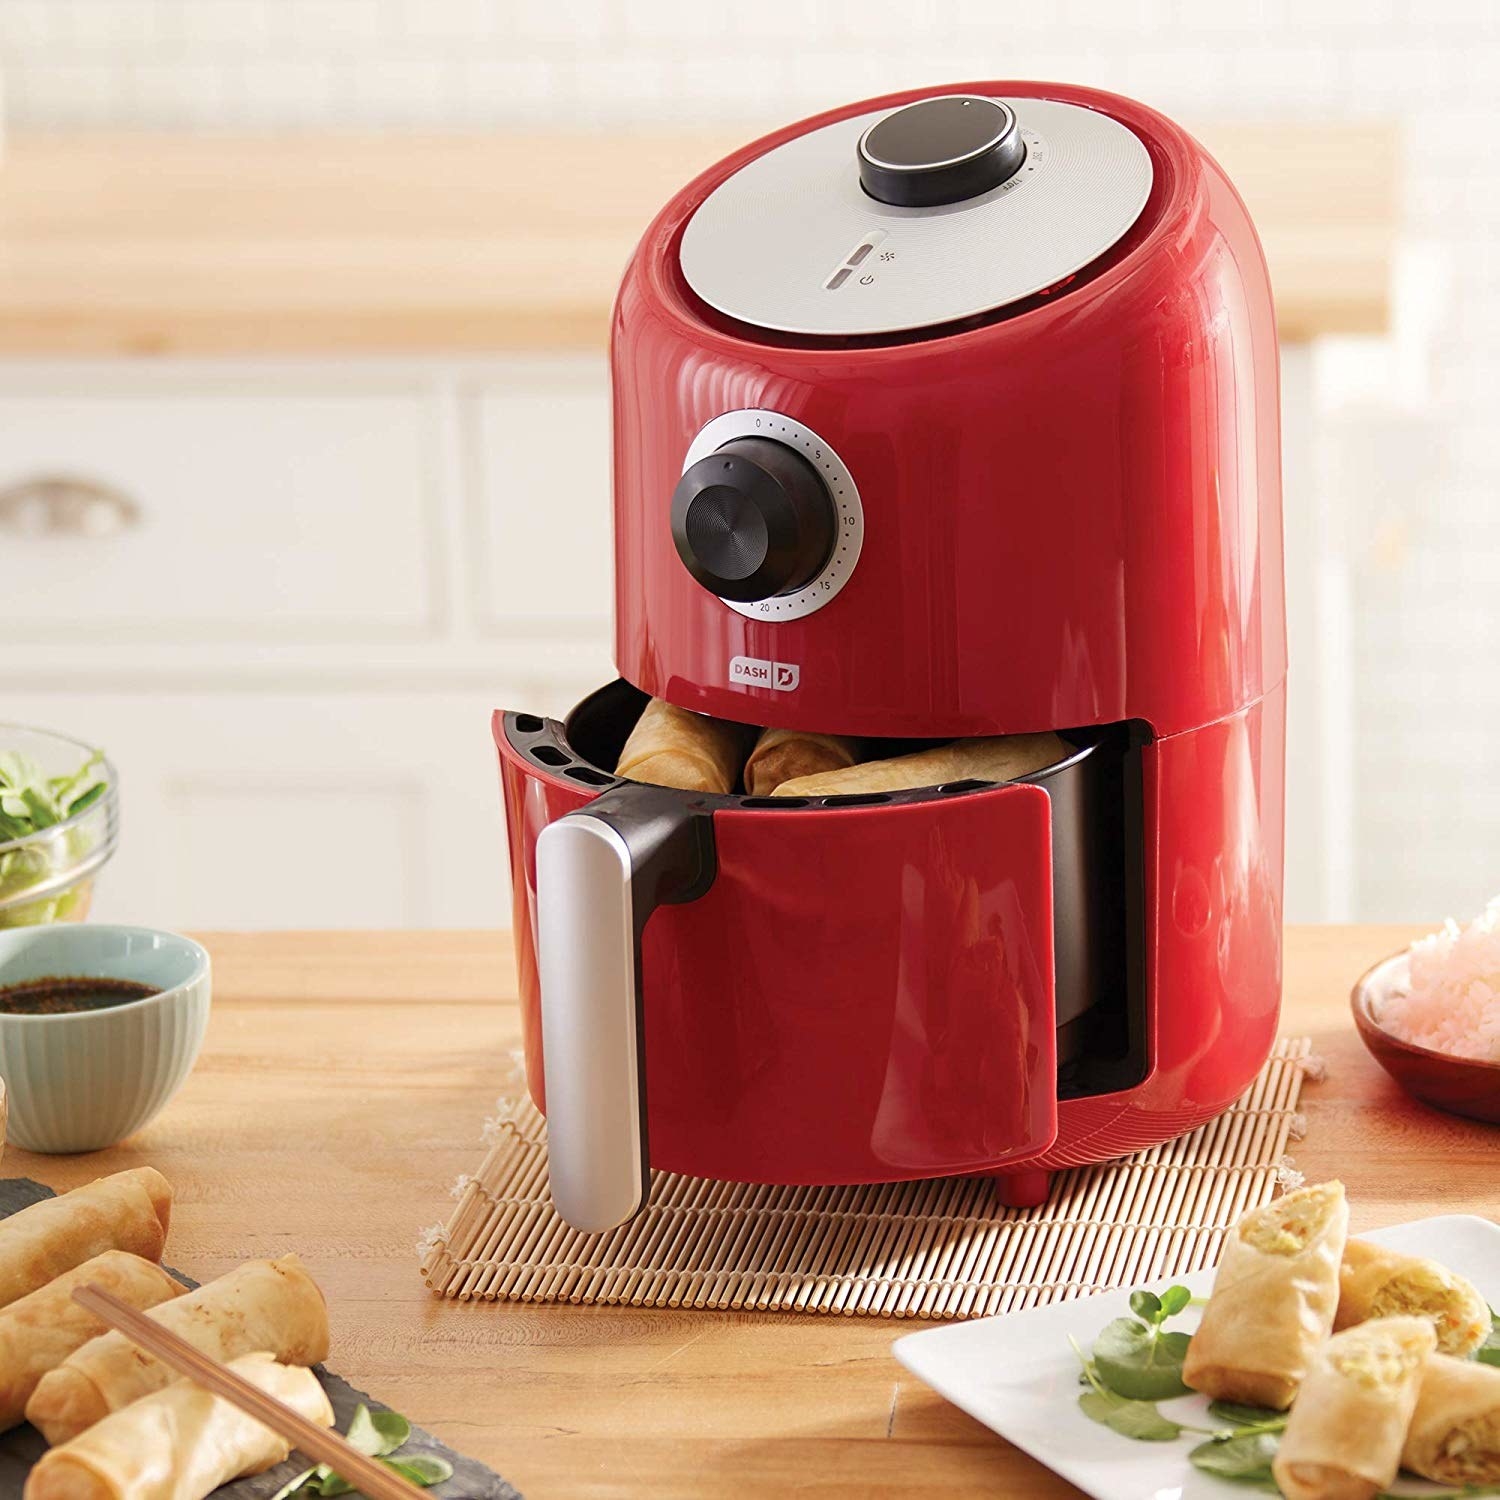 The air fryer in red, featuring an analog timer, round temperature dial, and convenient handle for removing the basket 